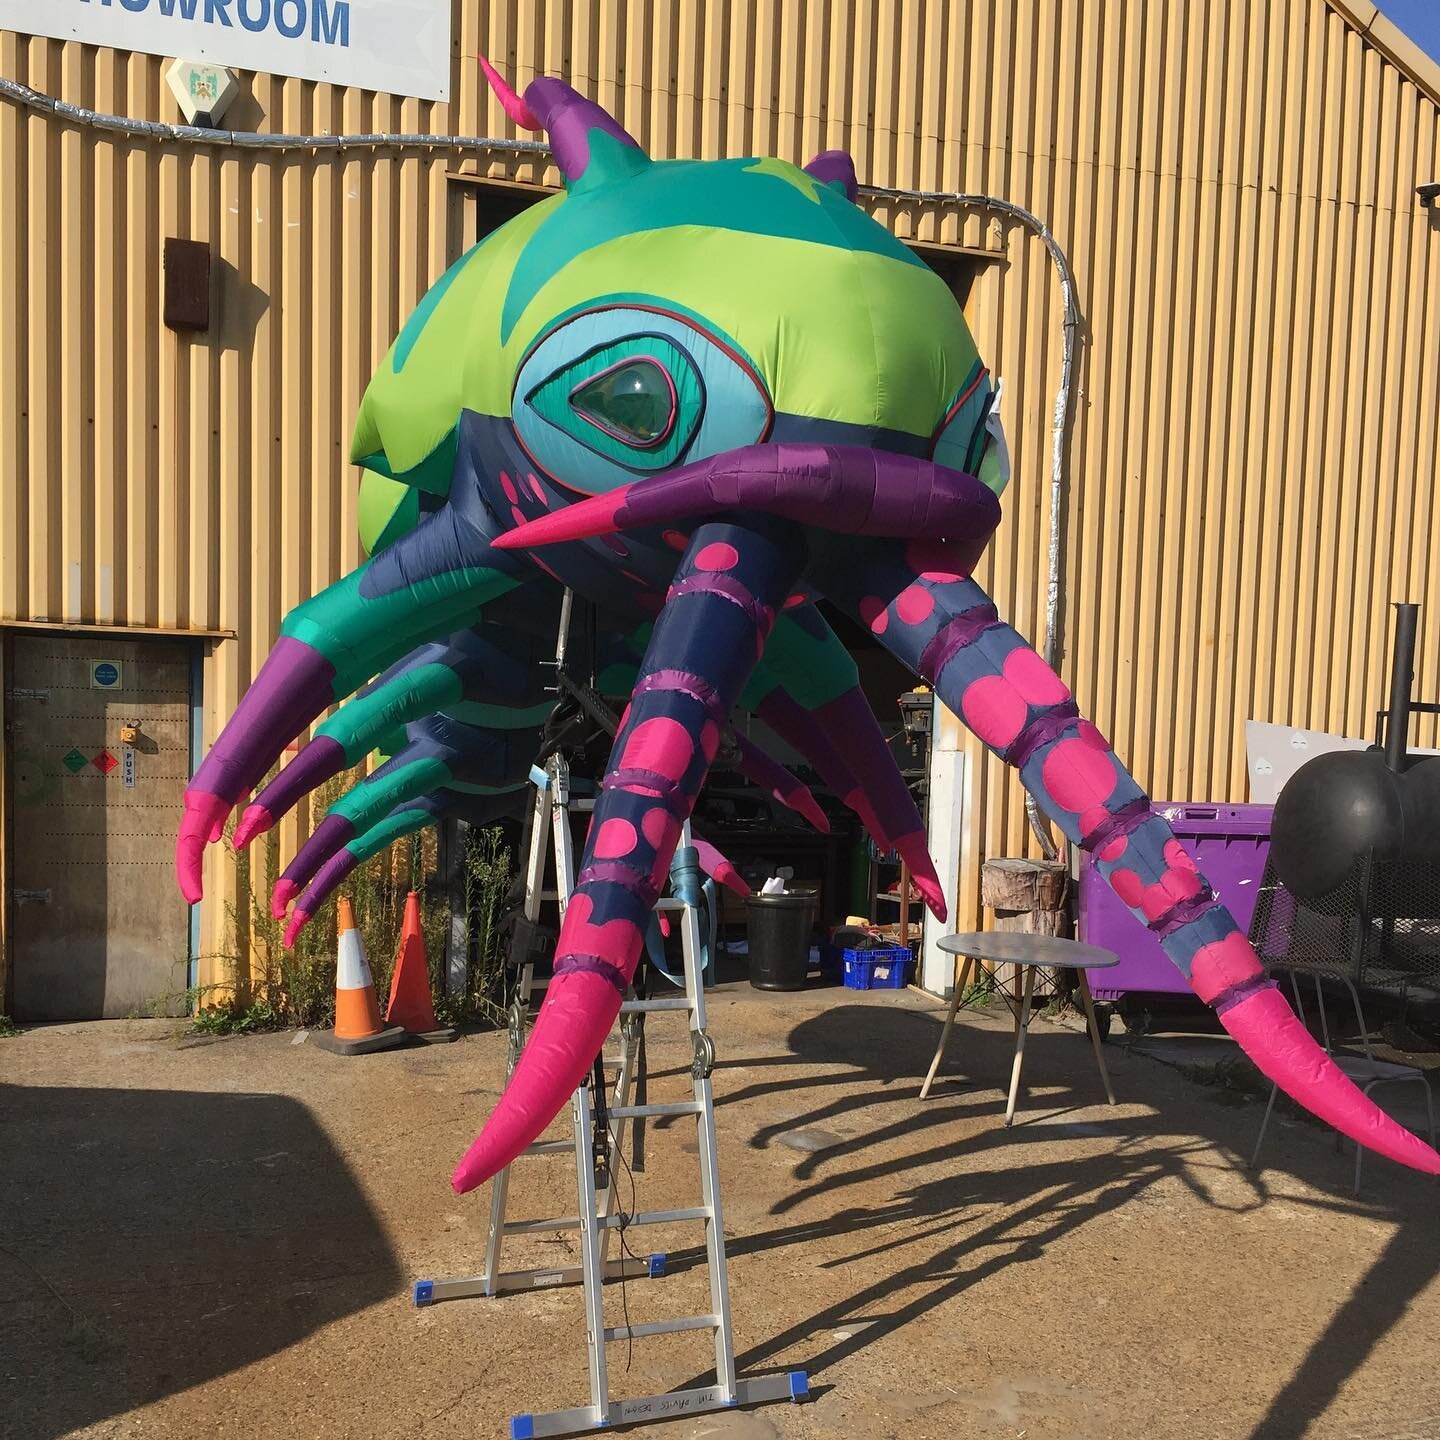 Almost ready to start trialling with this new beast, just a few days work to build the control unit. #giantpuppet #inflatablepuppet #puppet #walkabout #isopod #bathynemus #articulated #parade #sealife #underwater #shrimp #shrimppuppet #giantshrimp #d